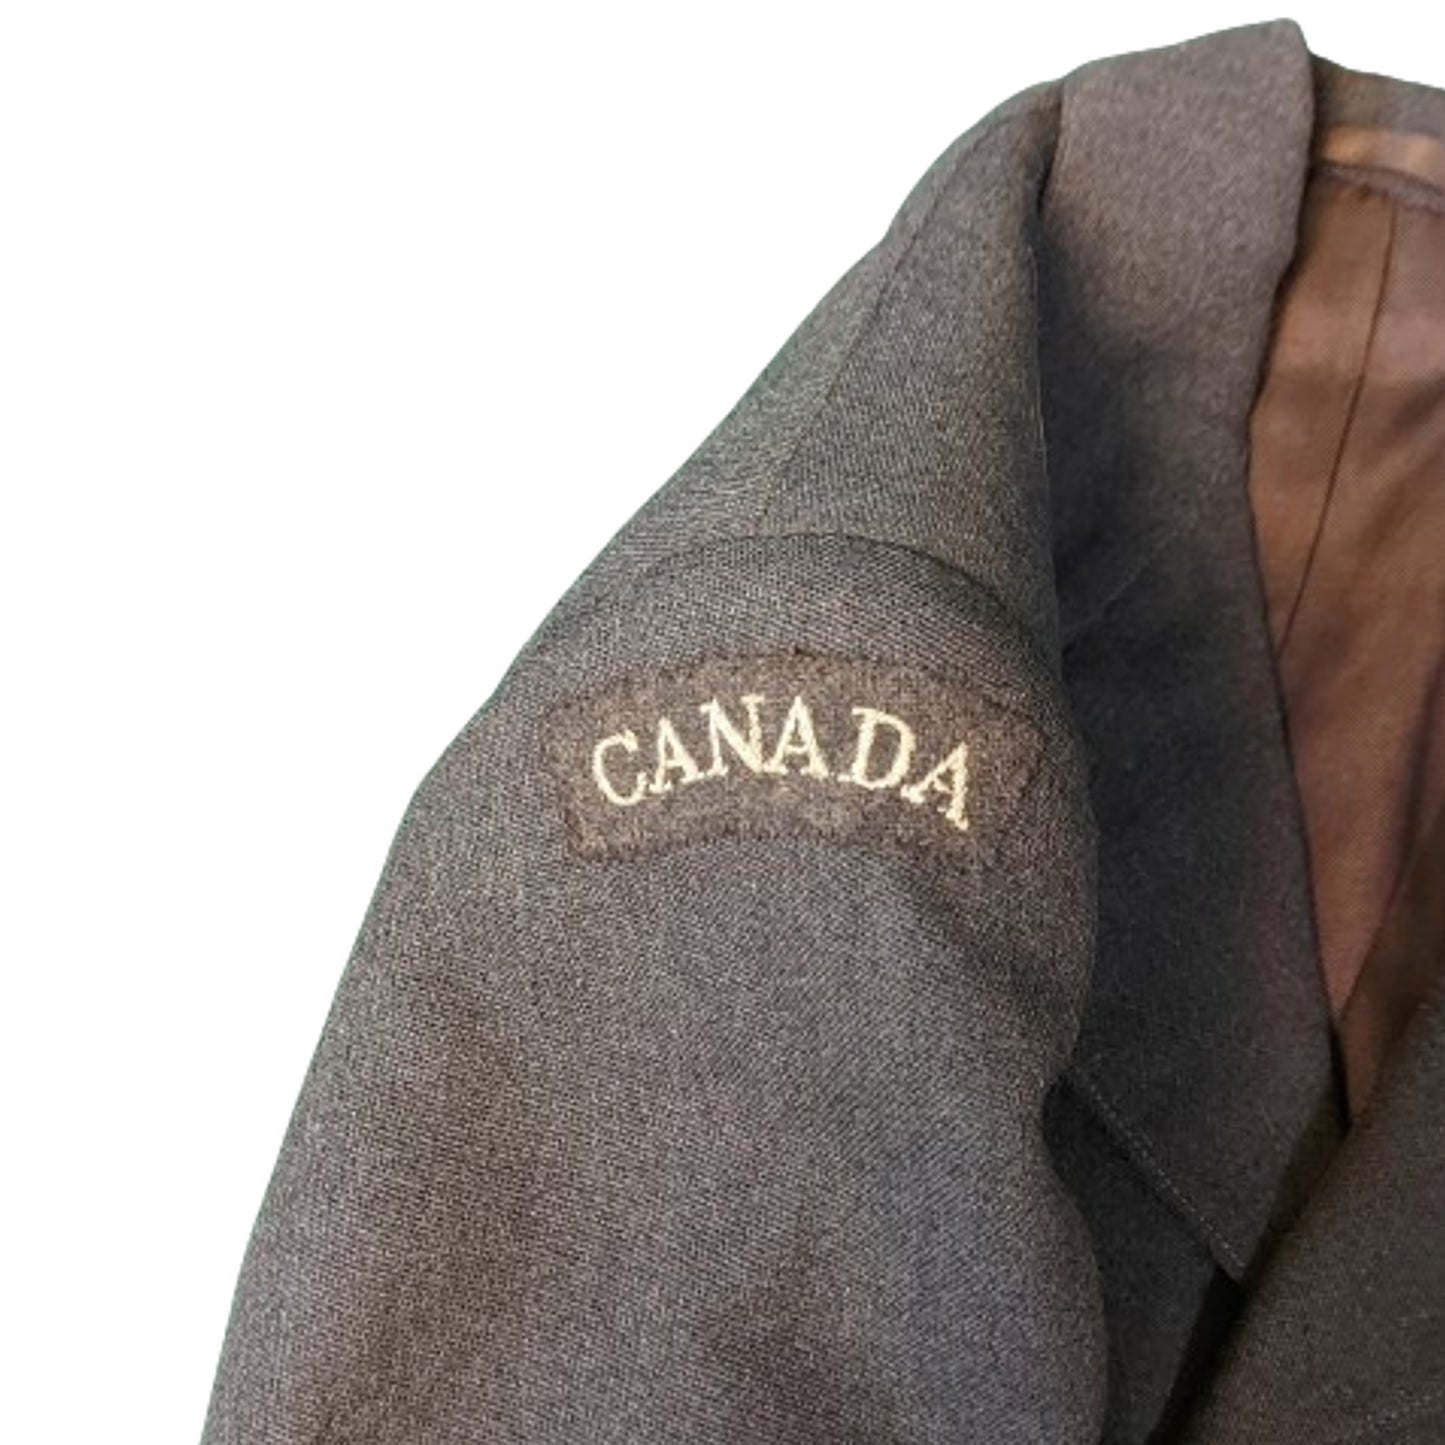 WW2 RCAF Royal Canadian Air force Observer's Tunic -DFC Recipient -Stalag Luft III Wooden Horse Escape